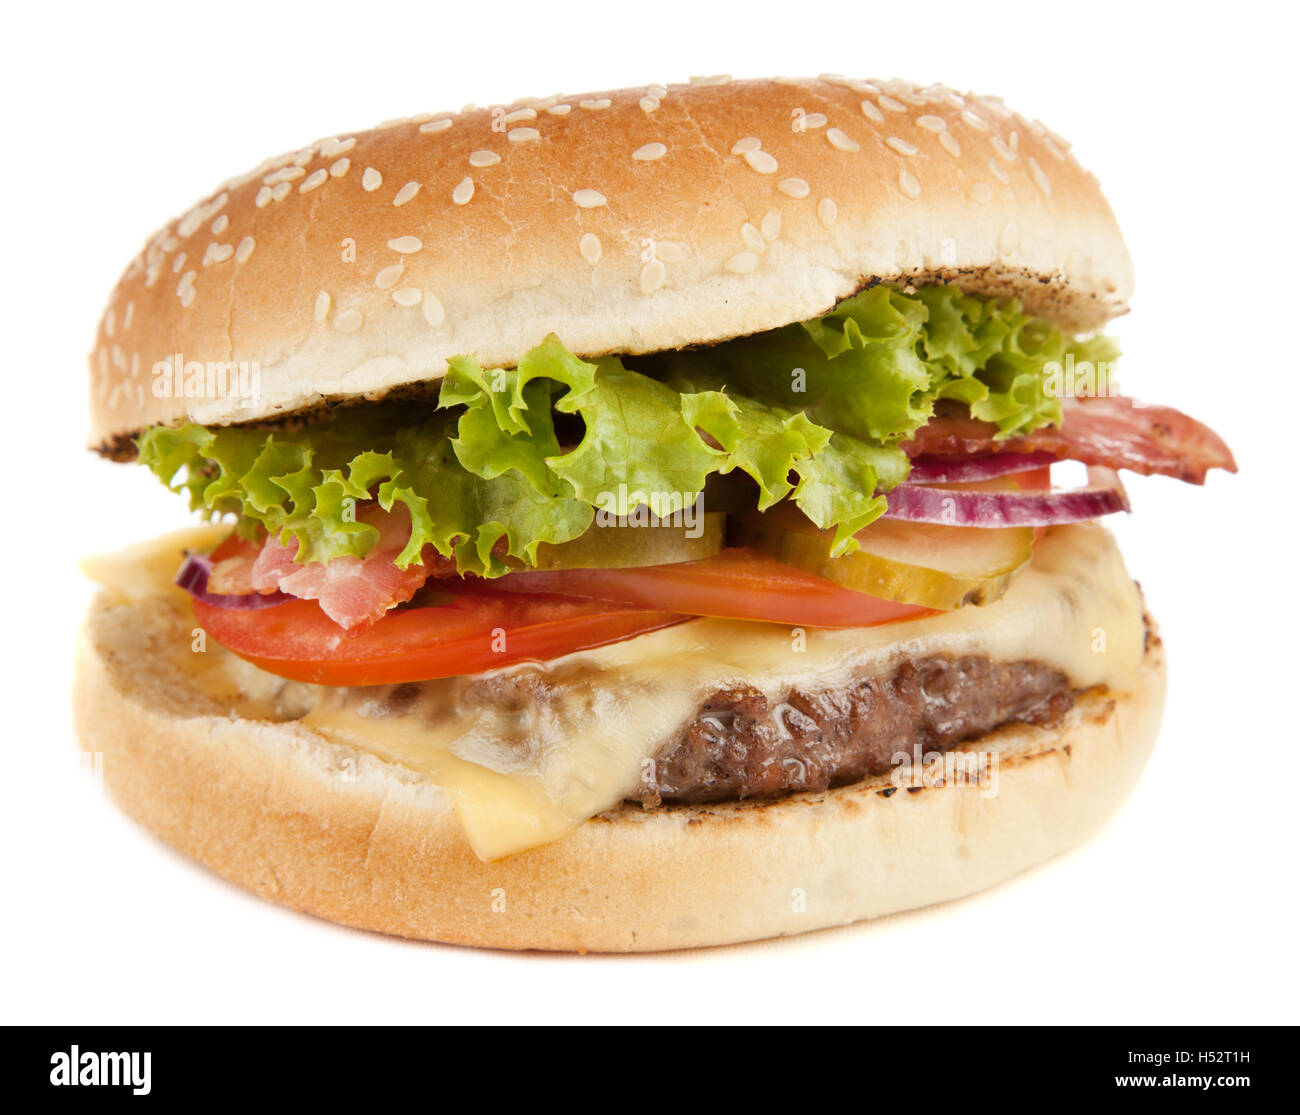 Delicious grilled burger Stock Photo